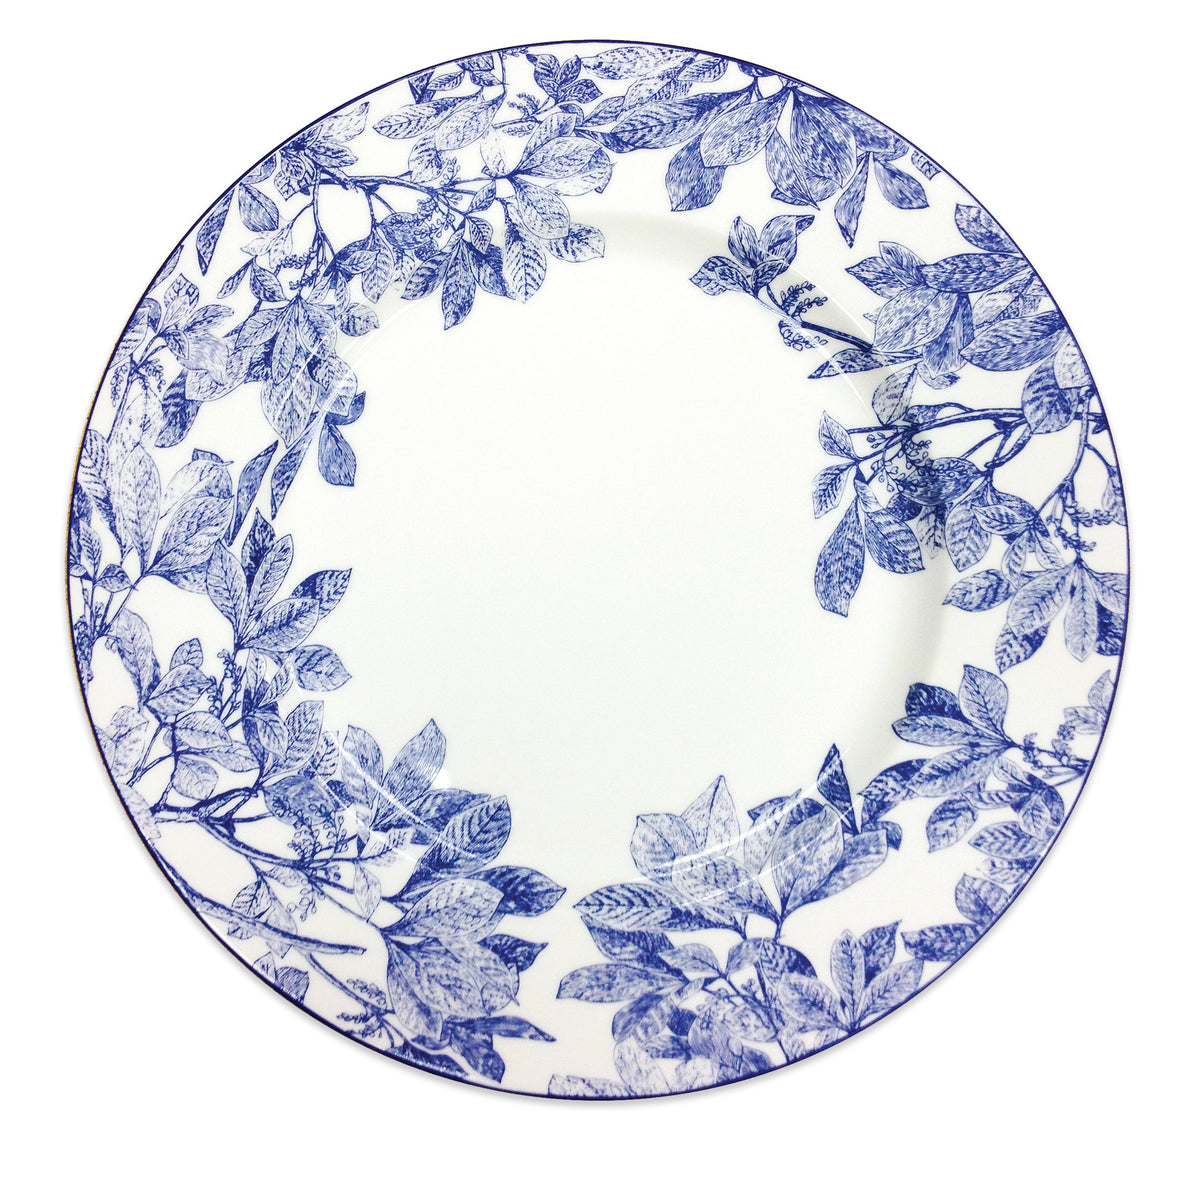 A Caskata Artisanal Home Arbor Blue Charger Plate featuring a delicate blue and white leaf design.